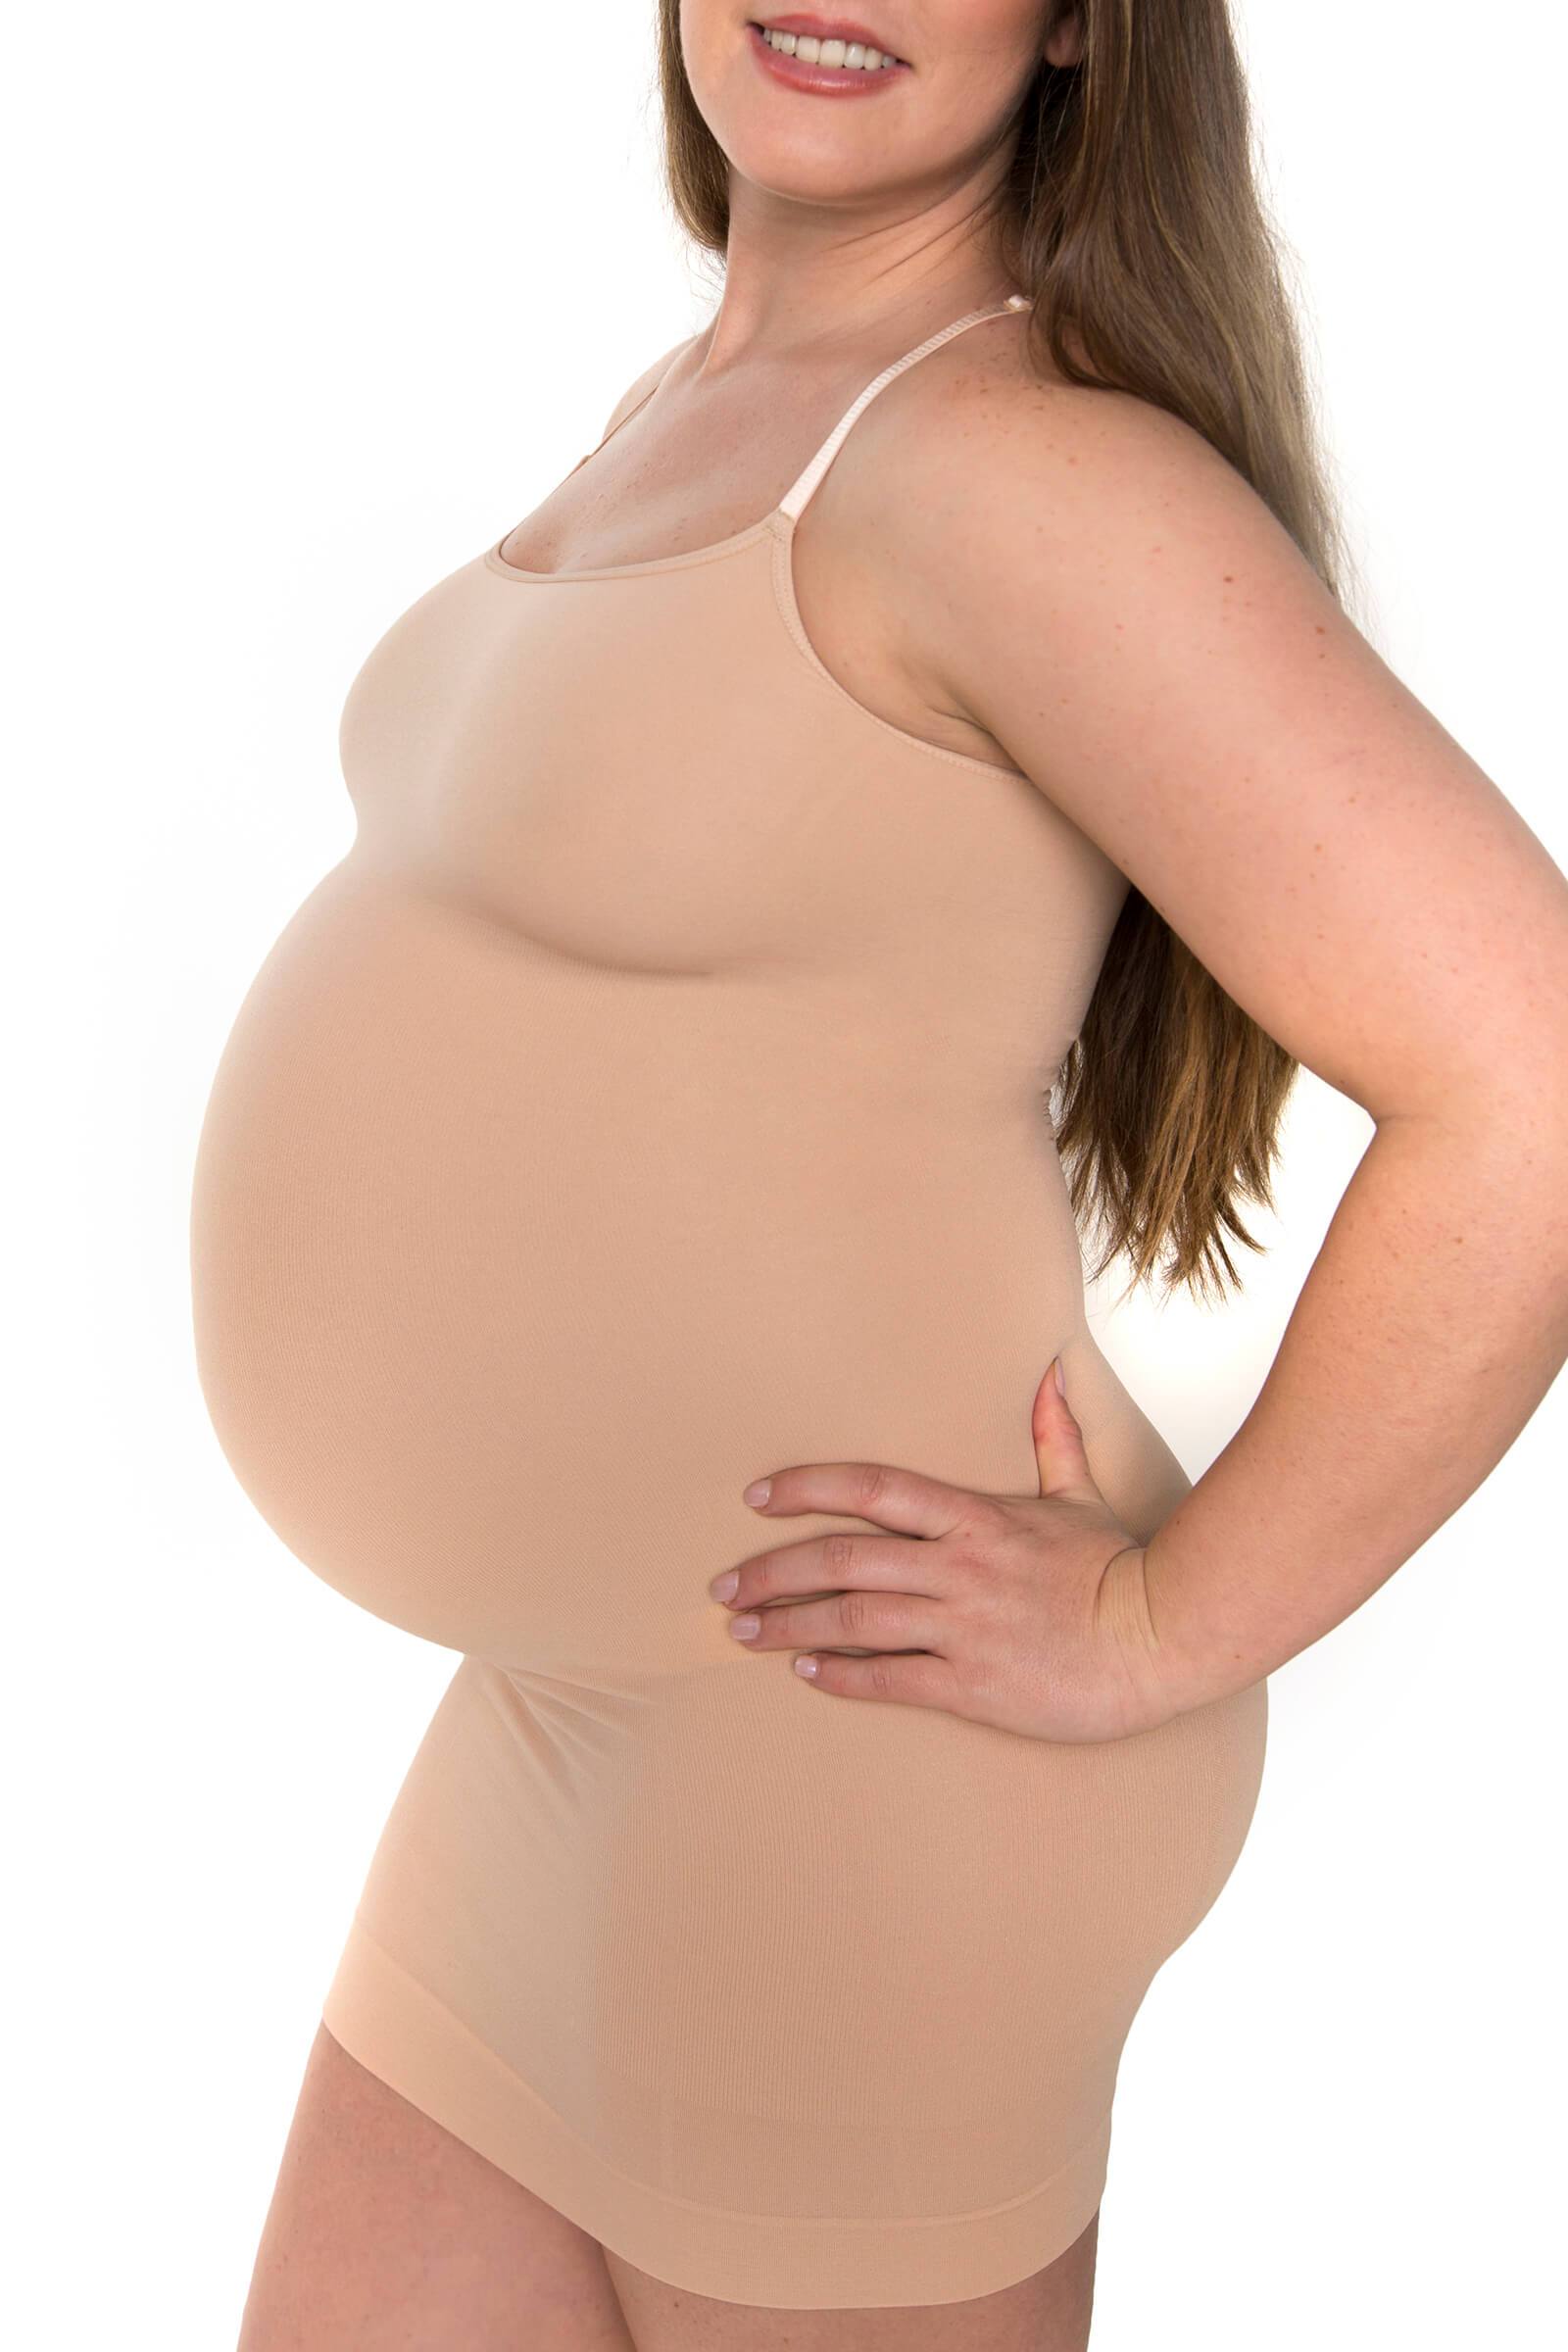 Is it safe to wear shapewear during pregnancy?